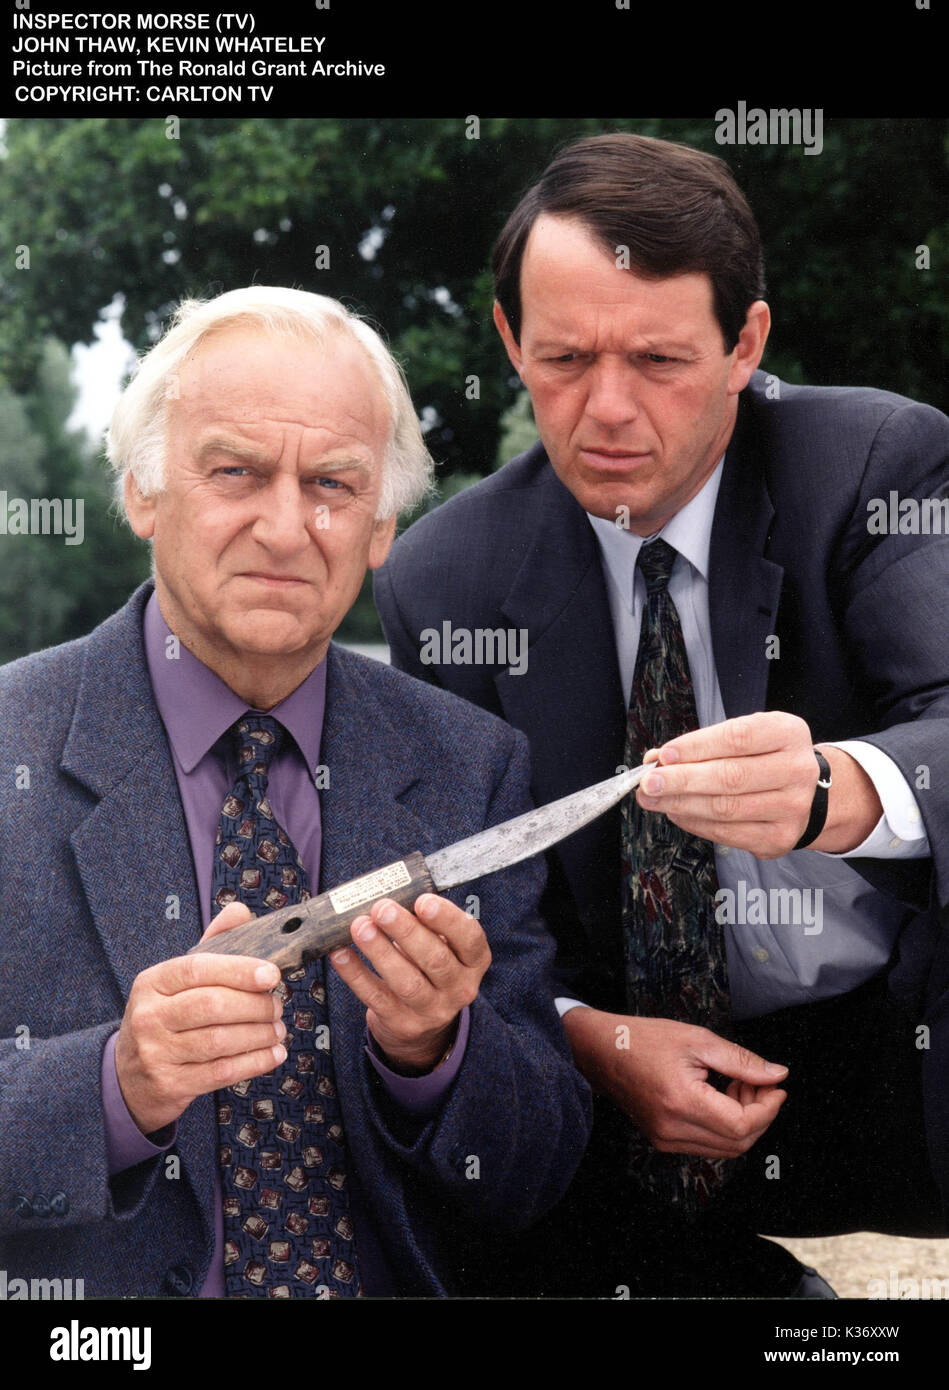 INSPECTOR MORSE JOHN THAW, KEVIN WHATELEY Stock Photo